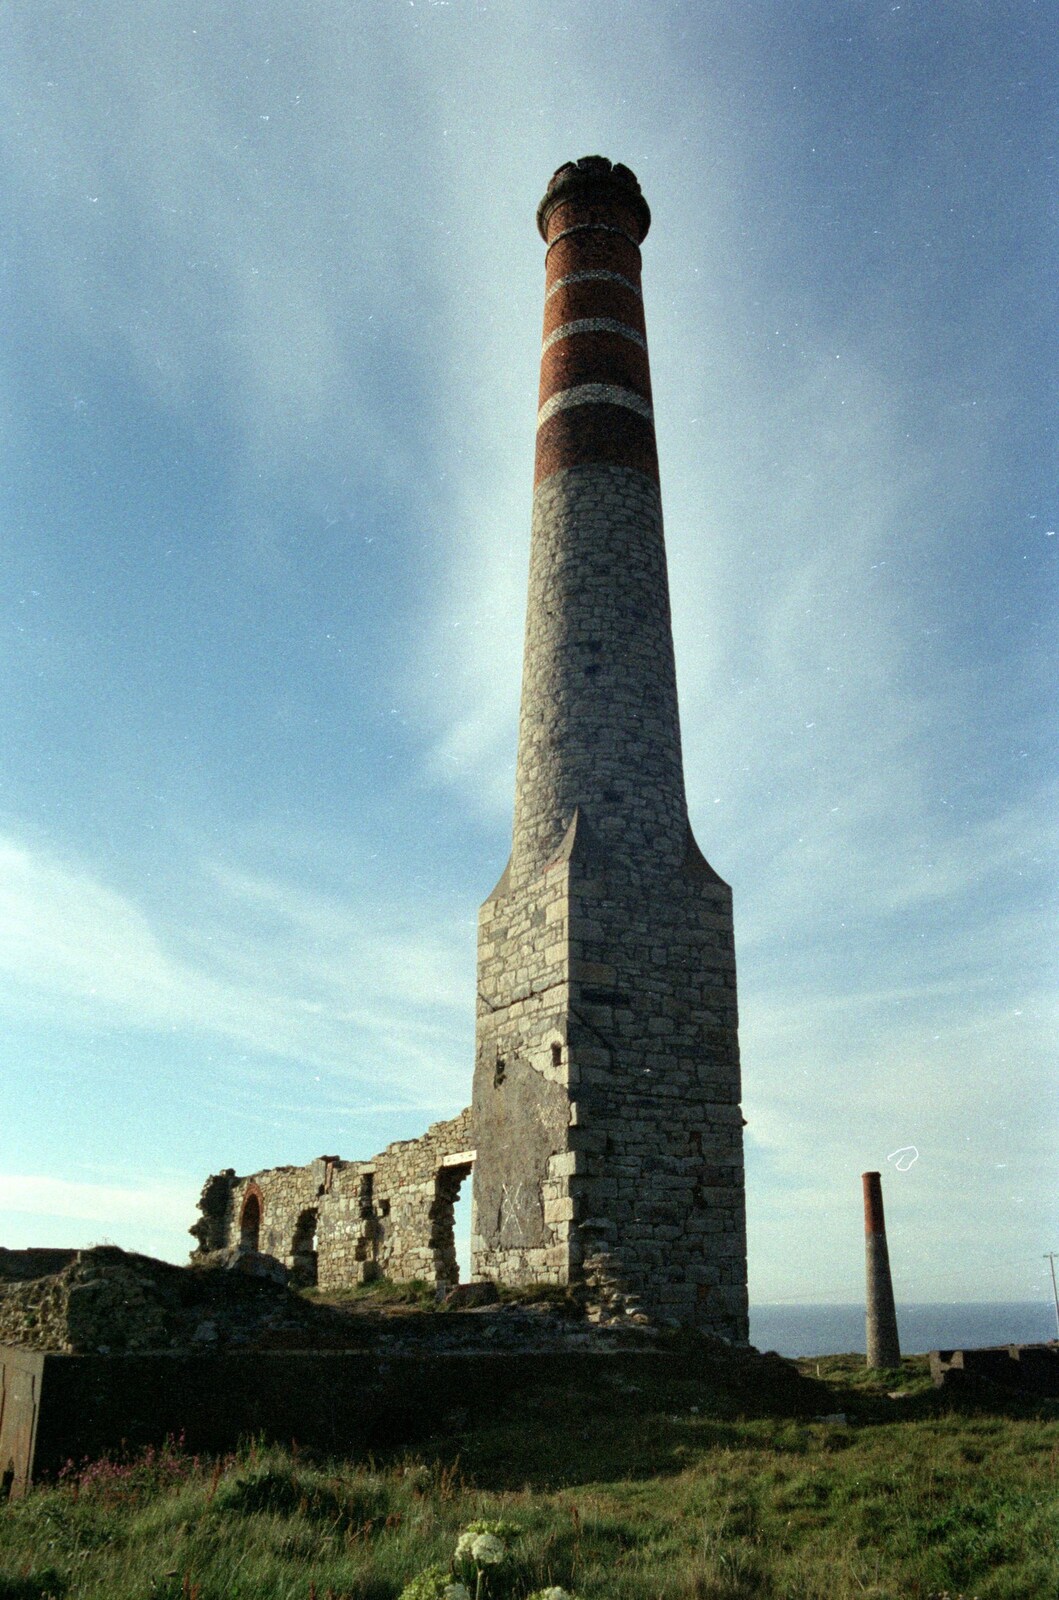 A derelict Cornish tin mine from Uni: An End-of-it-all Trip to Land's End, Cornwall - 13th June 1989